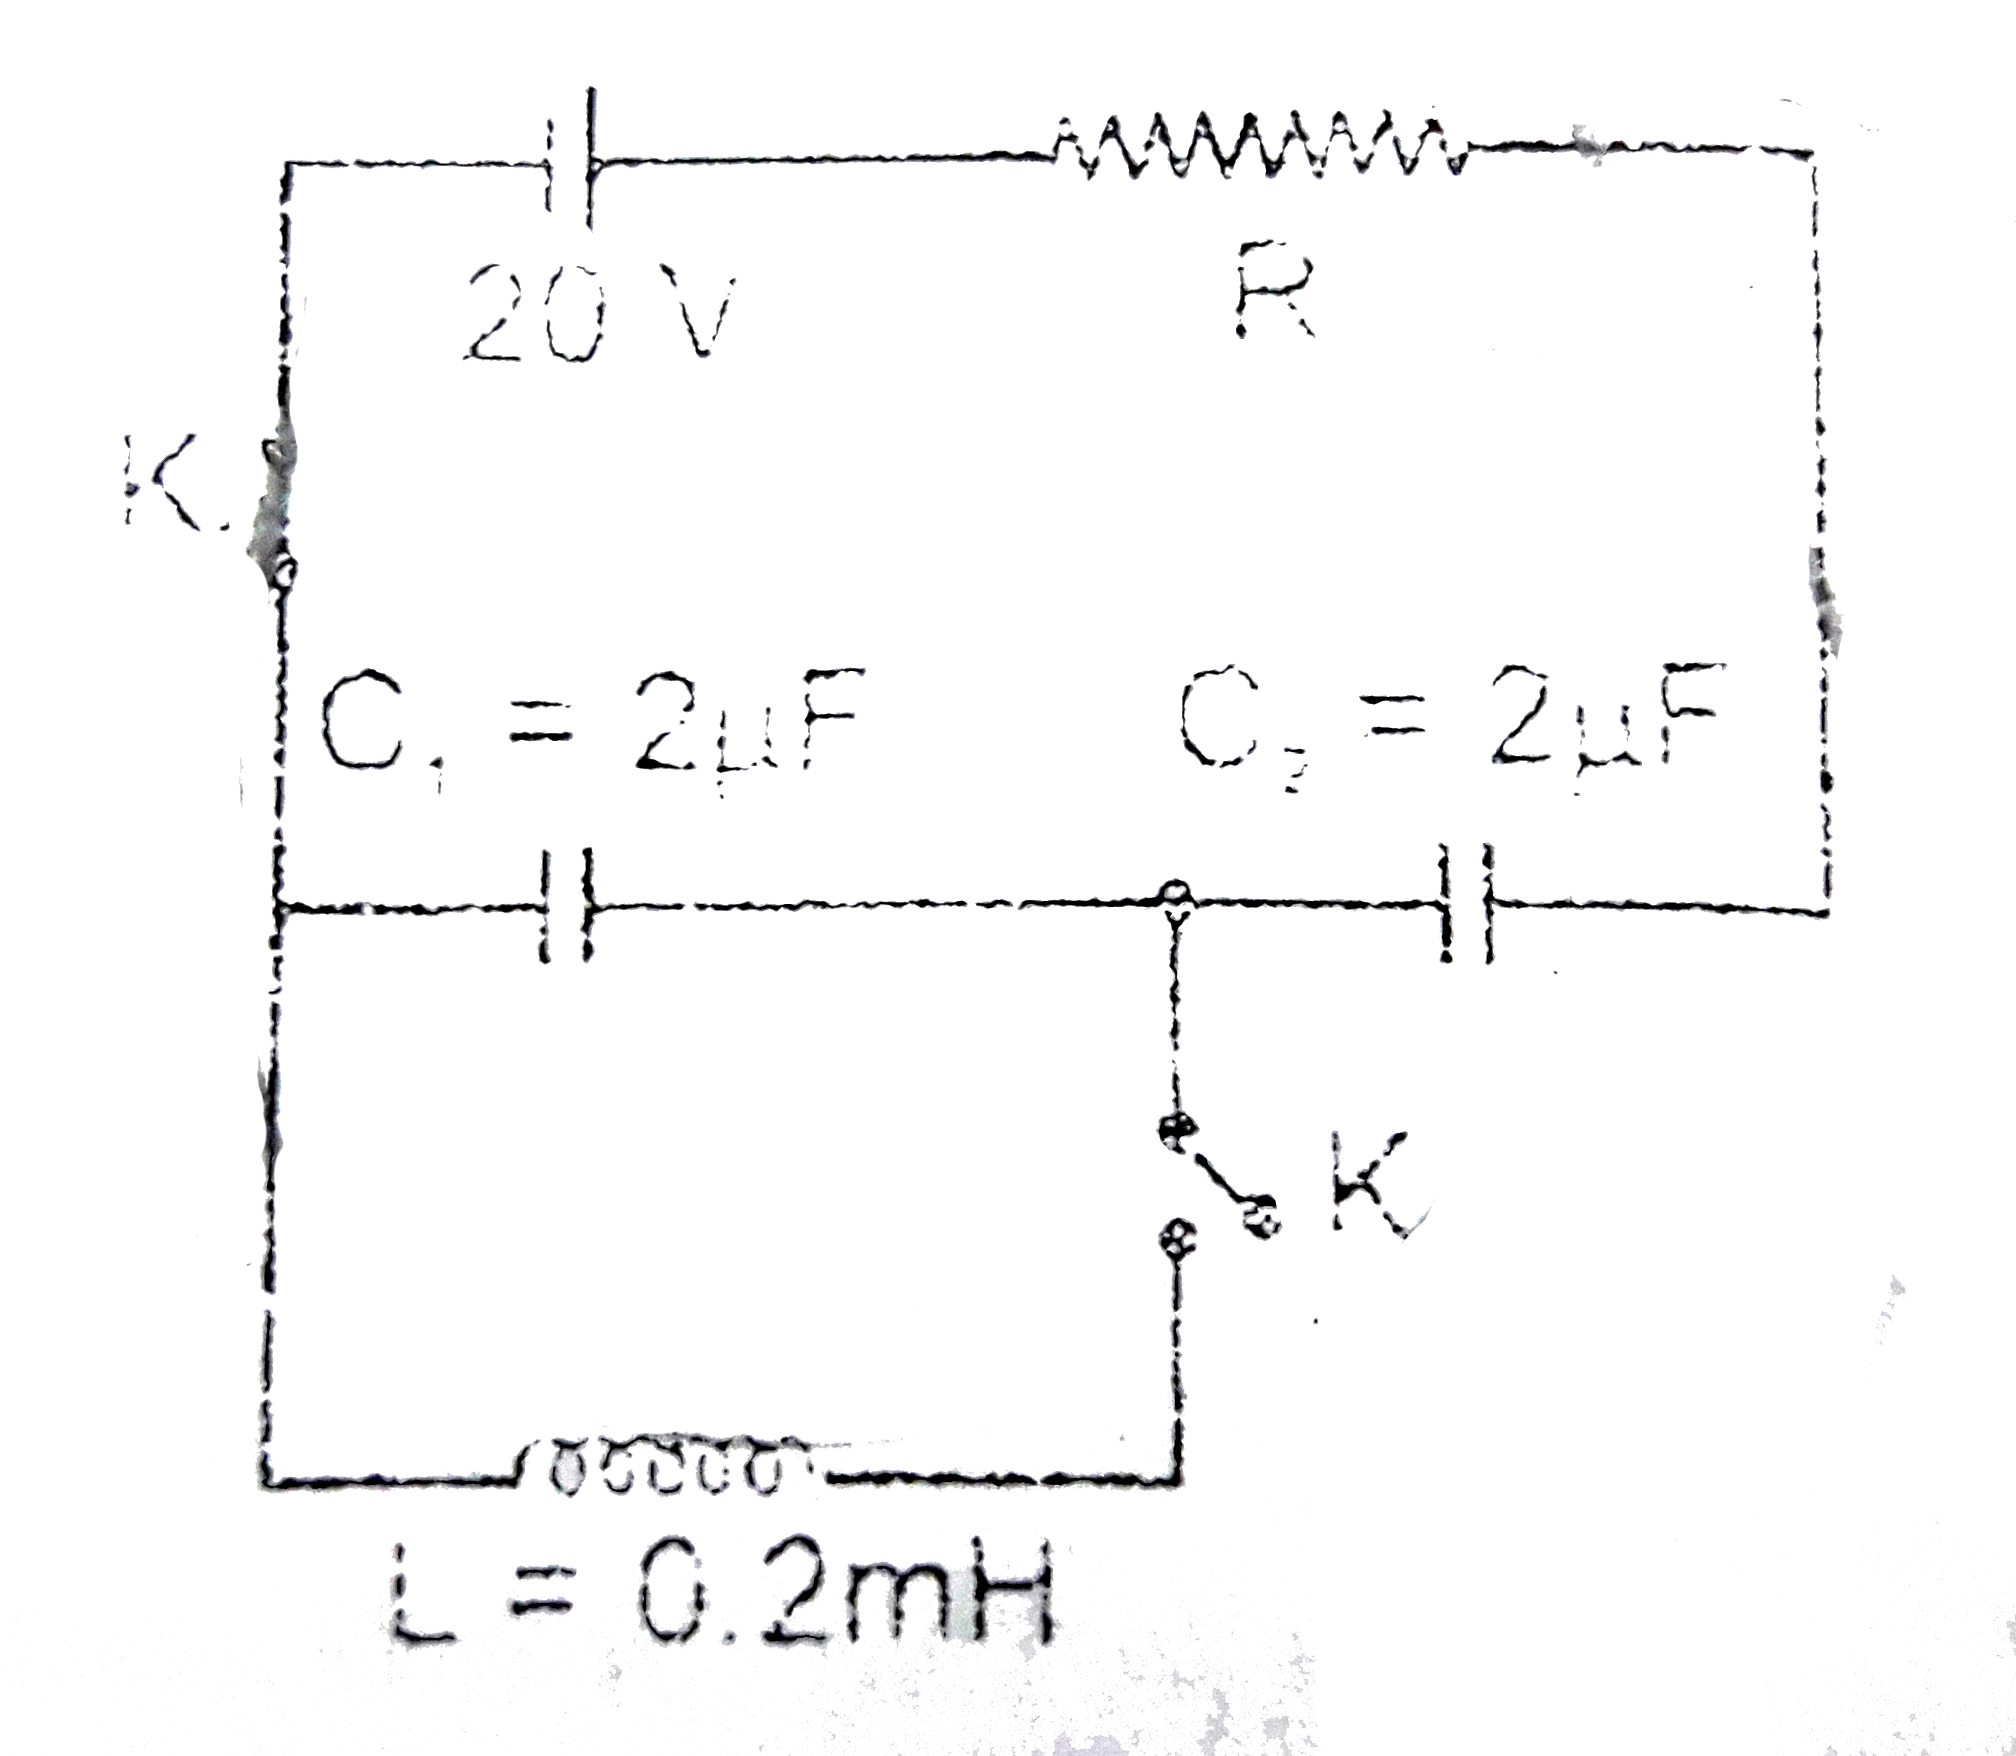 A circuit containing capacitors C(1) and C(2) as shown in the figure are in steady state with key K(1) closed.At the instant t=0, if K(1) is opened and K(2) is closed then the maximum current in the circuit will be: